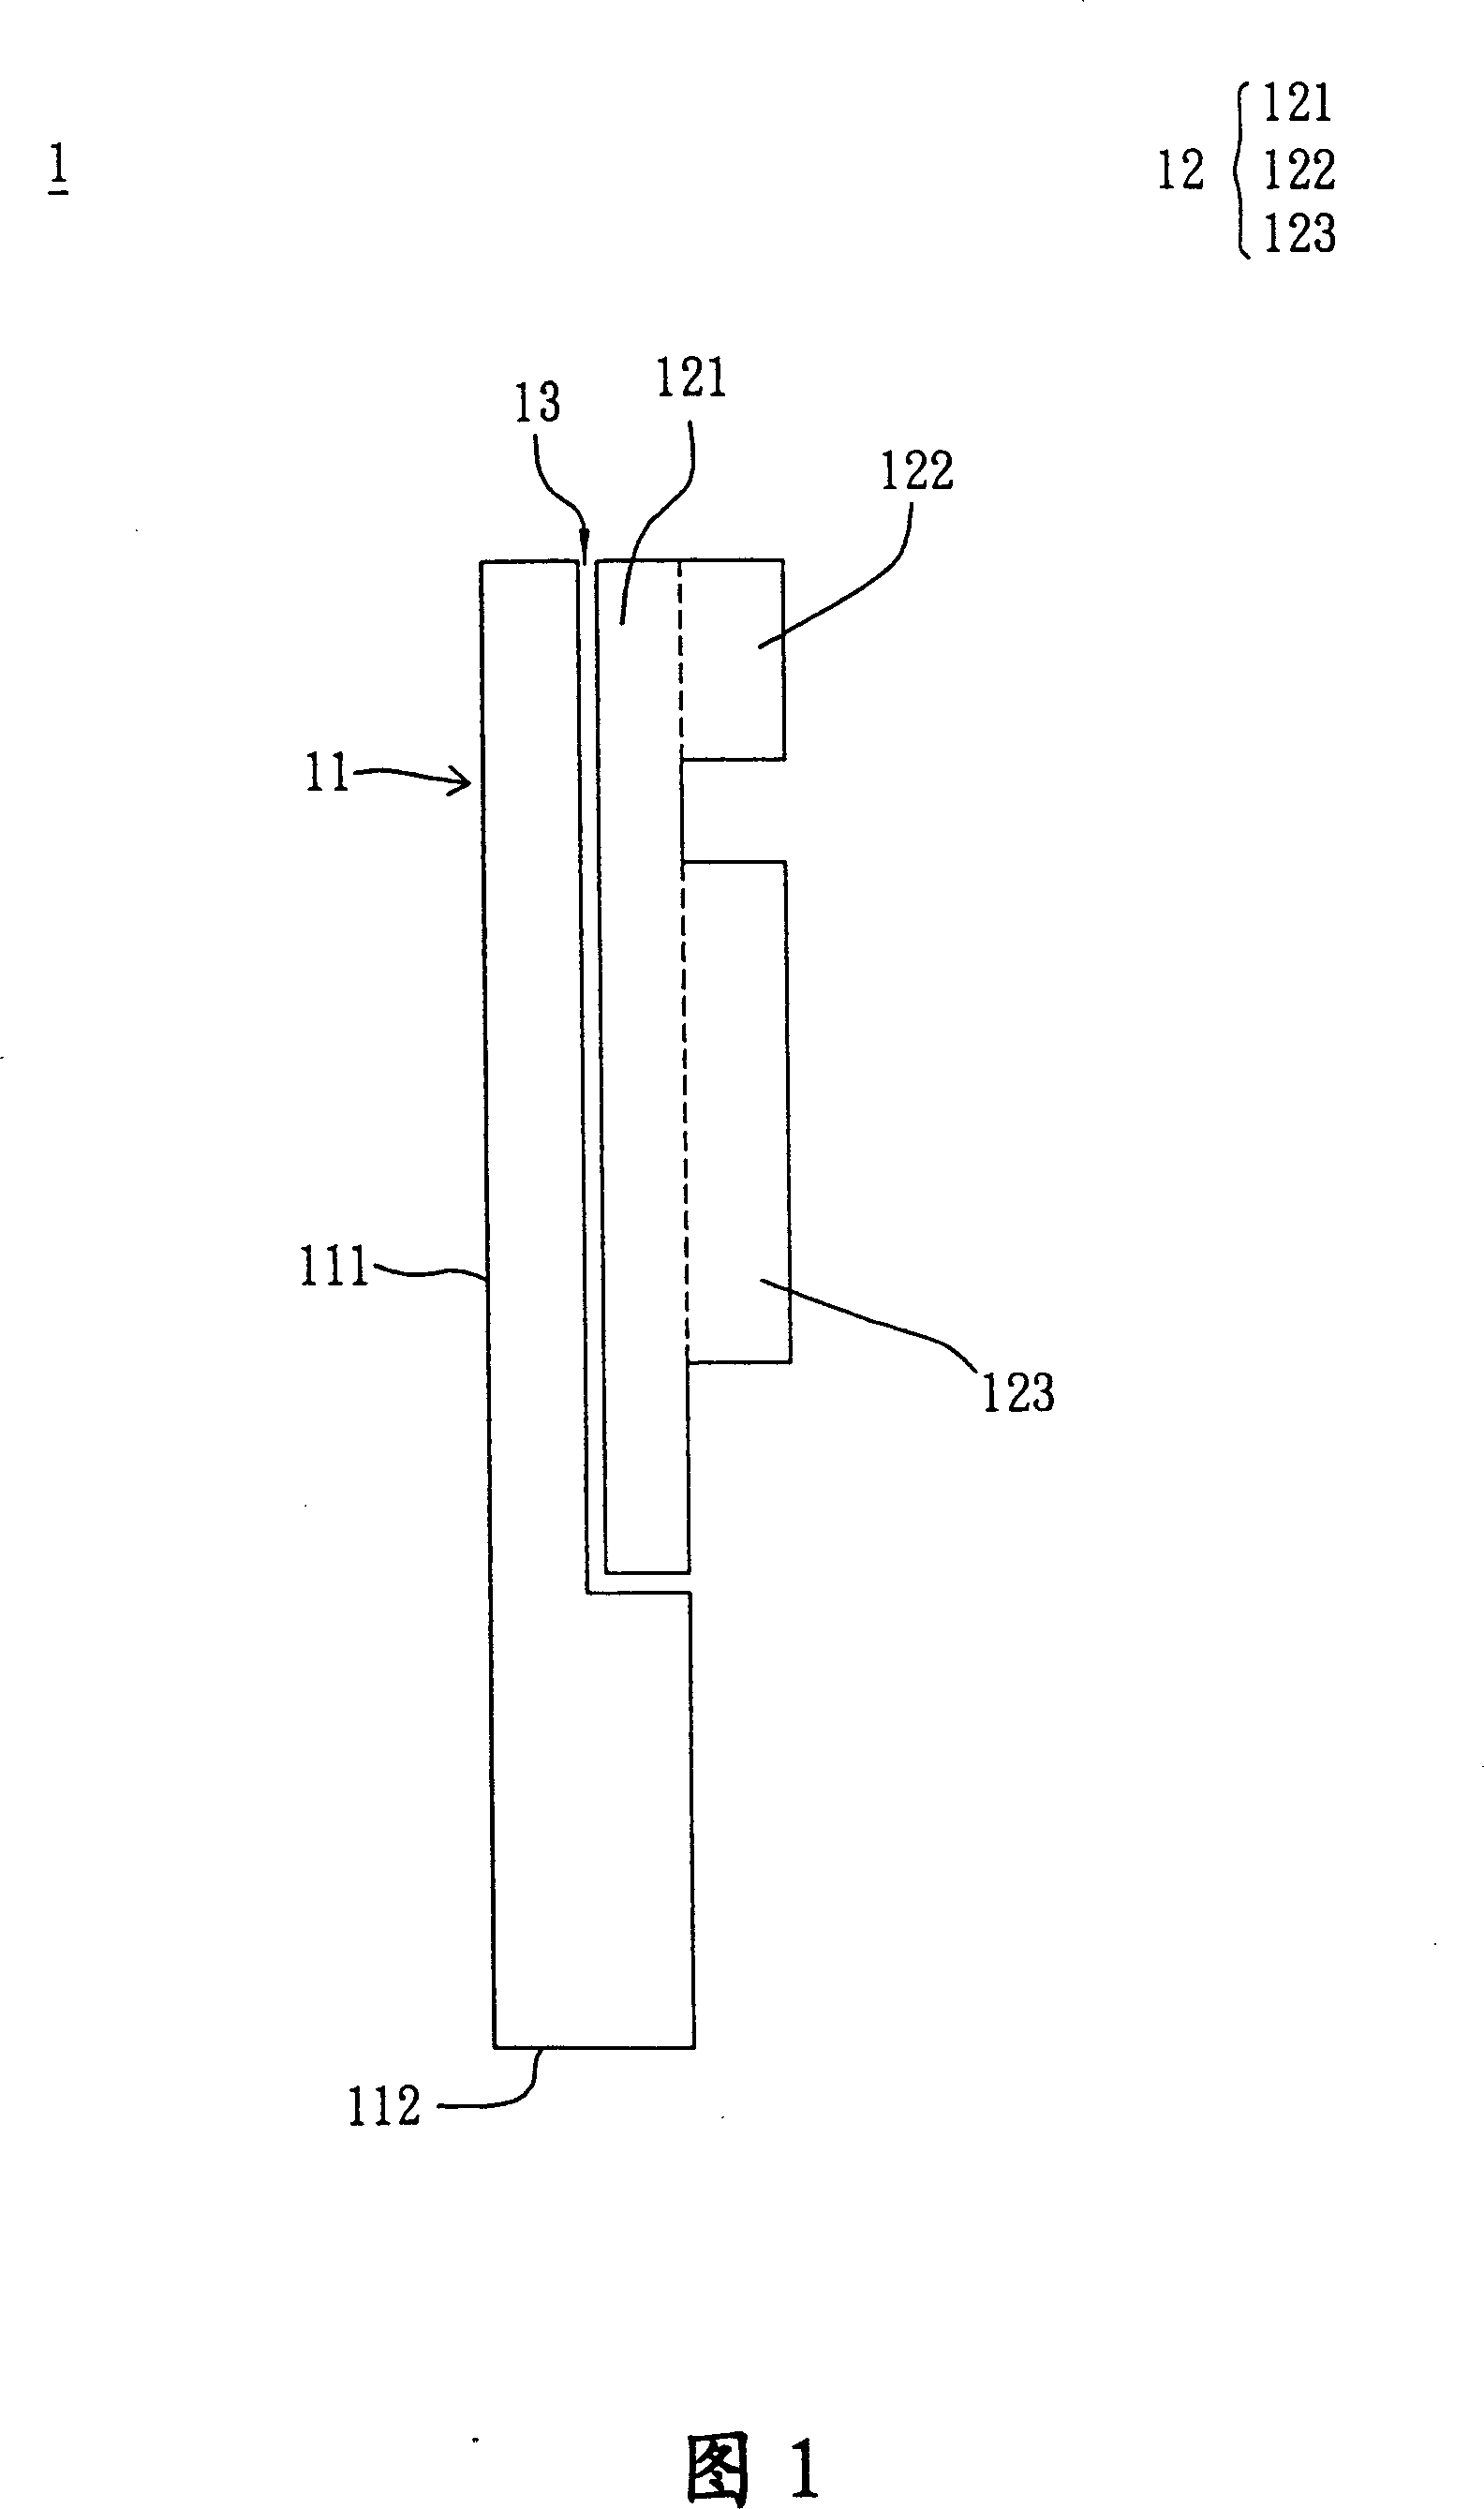 Double-frequency reversed F-typed antenna